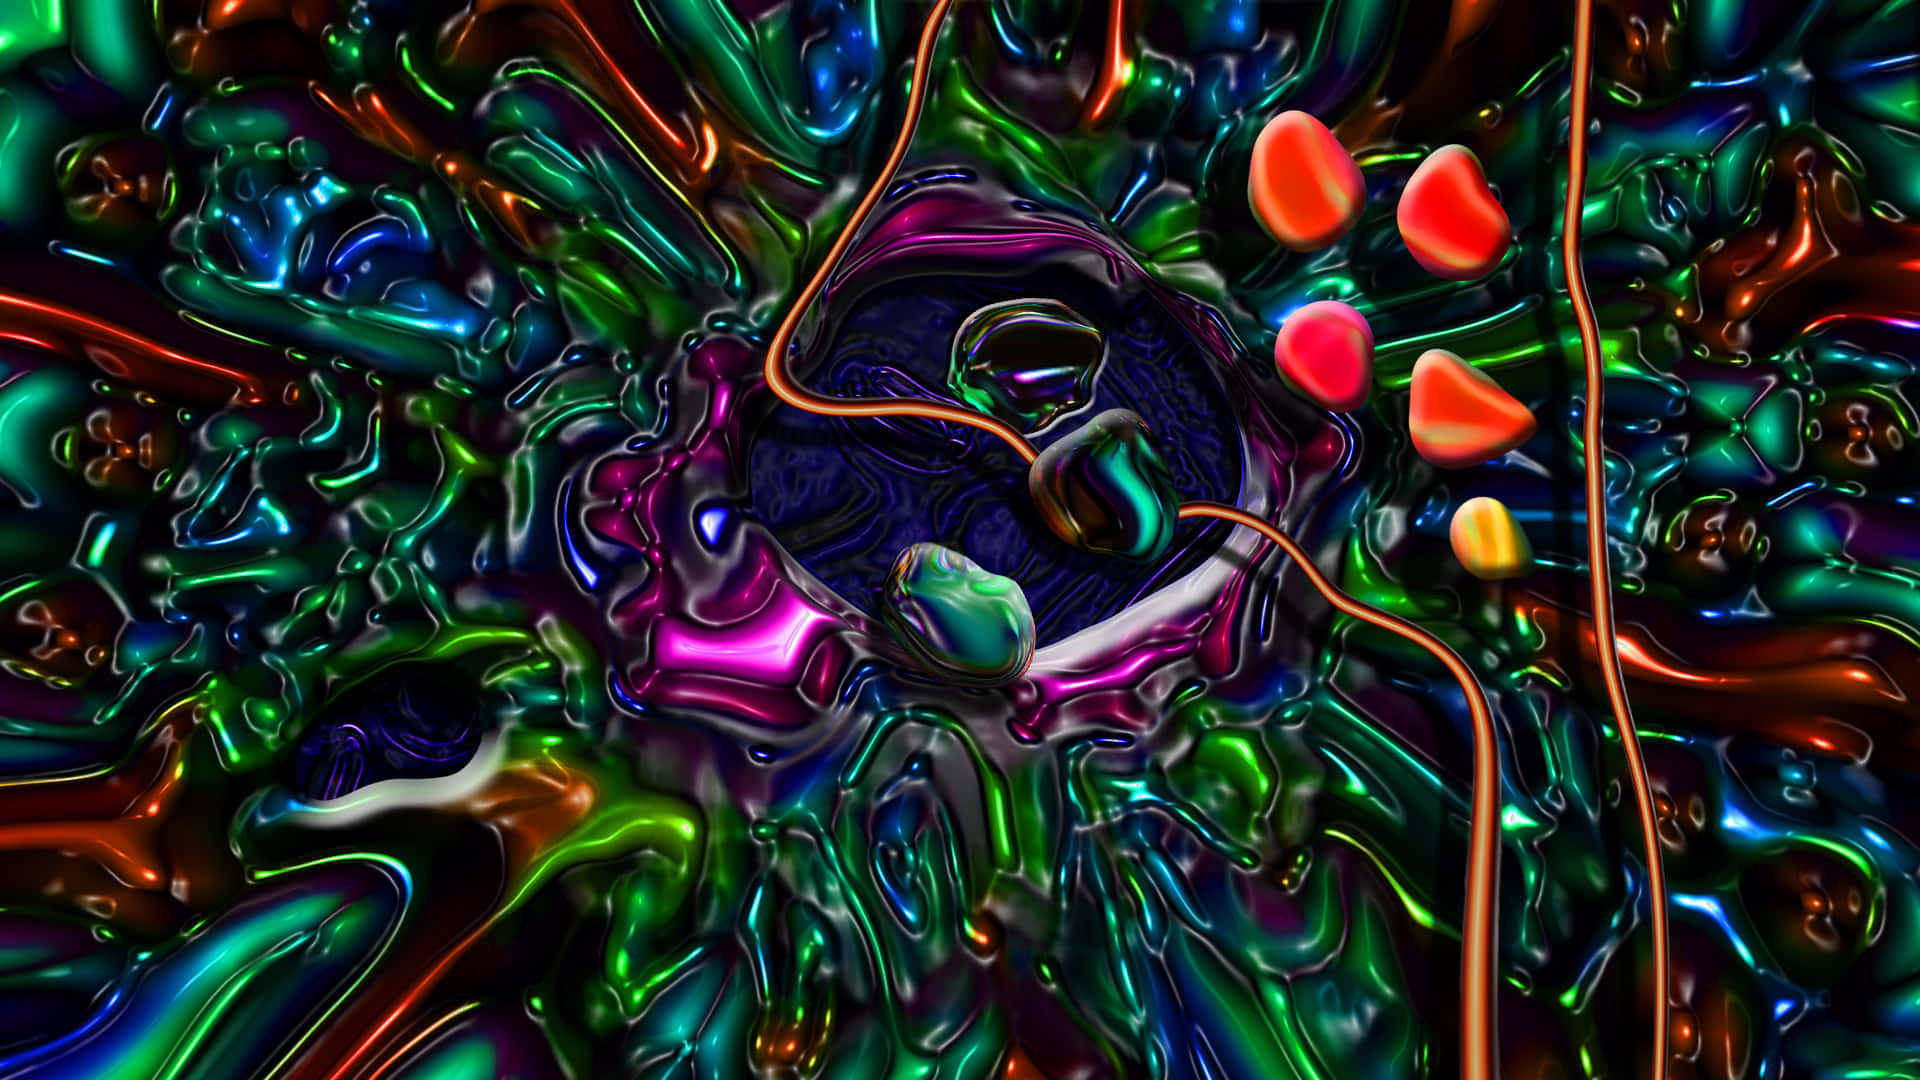 The beauty of abstract trippy design